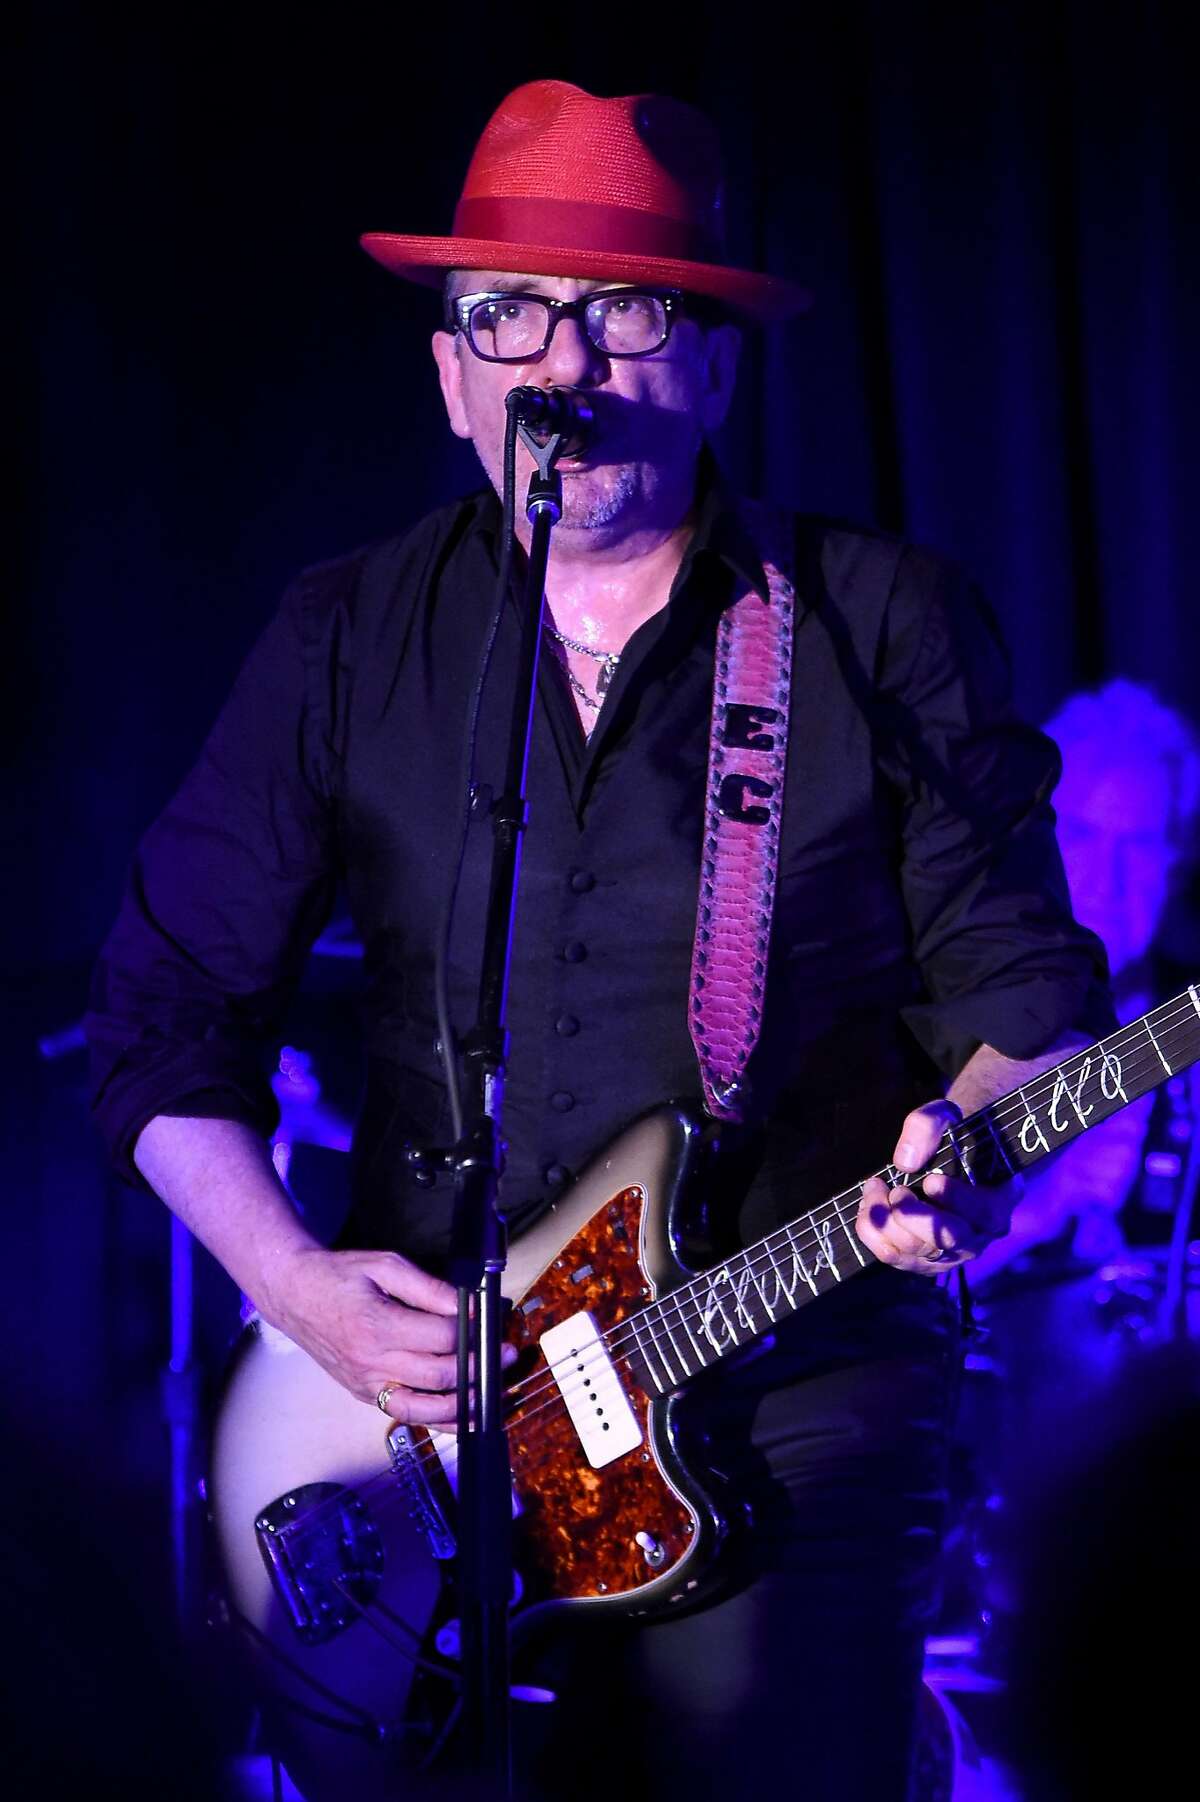 WASHINGTON, DC - APRIL 29: Elvis Costello performs at Full Frontal With Samantha Bee's Not The White House Correspondents' Dinner After Party at the W Hotel POV Rooftop on April 29, 2017 in Washington, DC. (Photo by Dimitrios Kambouris/Getty Images for TBS)